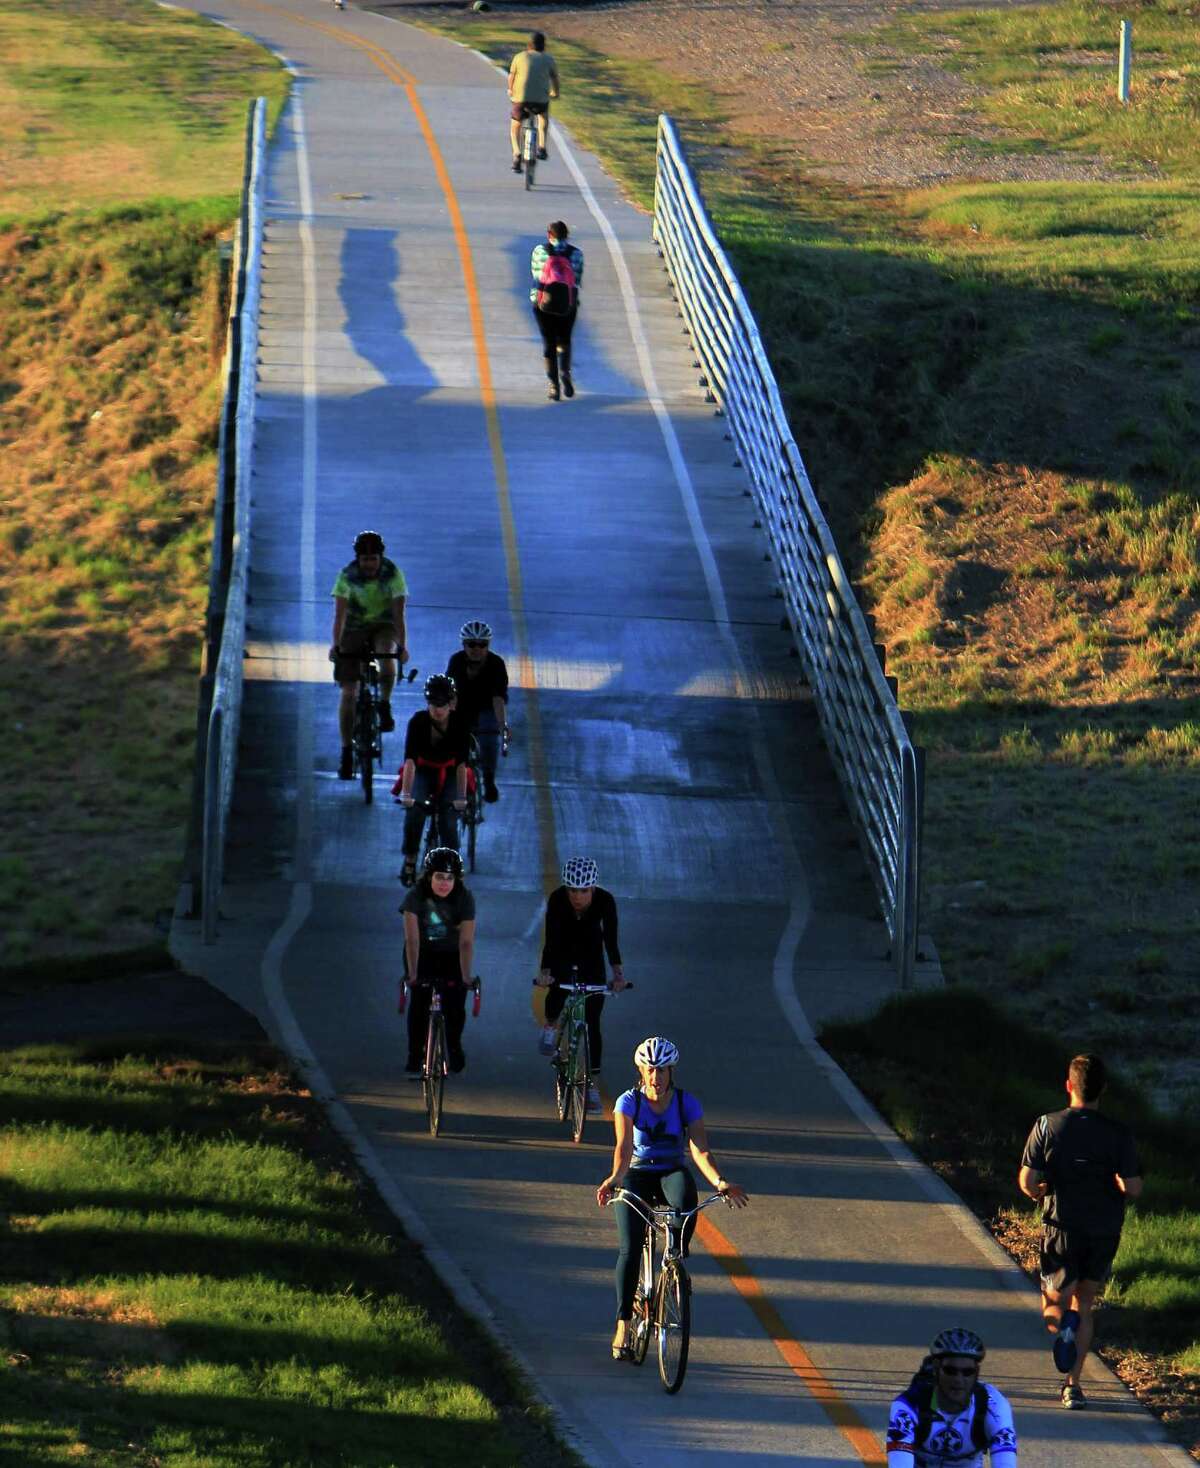 Tuesday's crisp, sunny weather lured cyclists and joggers onto the Heights Bike Trail ride over White Oak Bayou and under Interstate 10 near downtown.